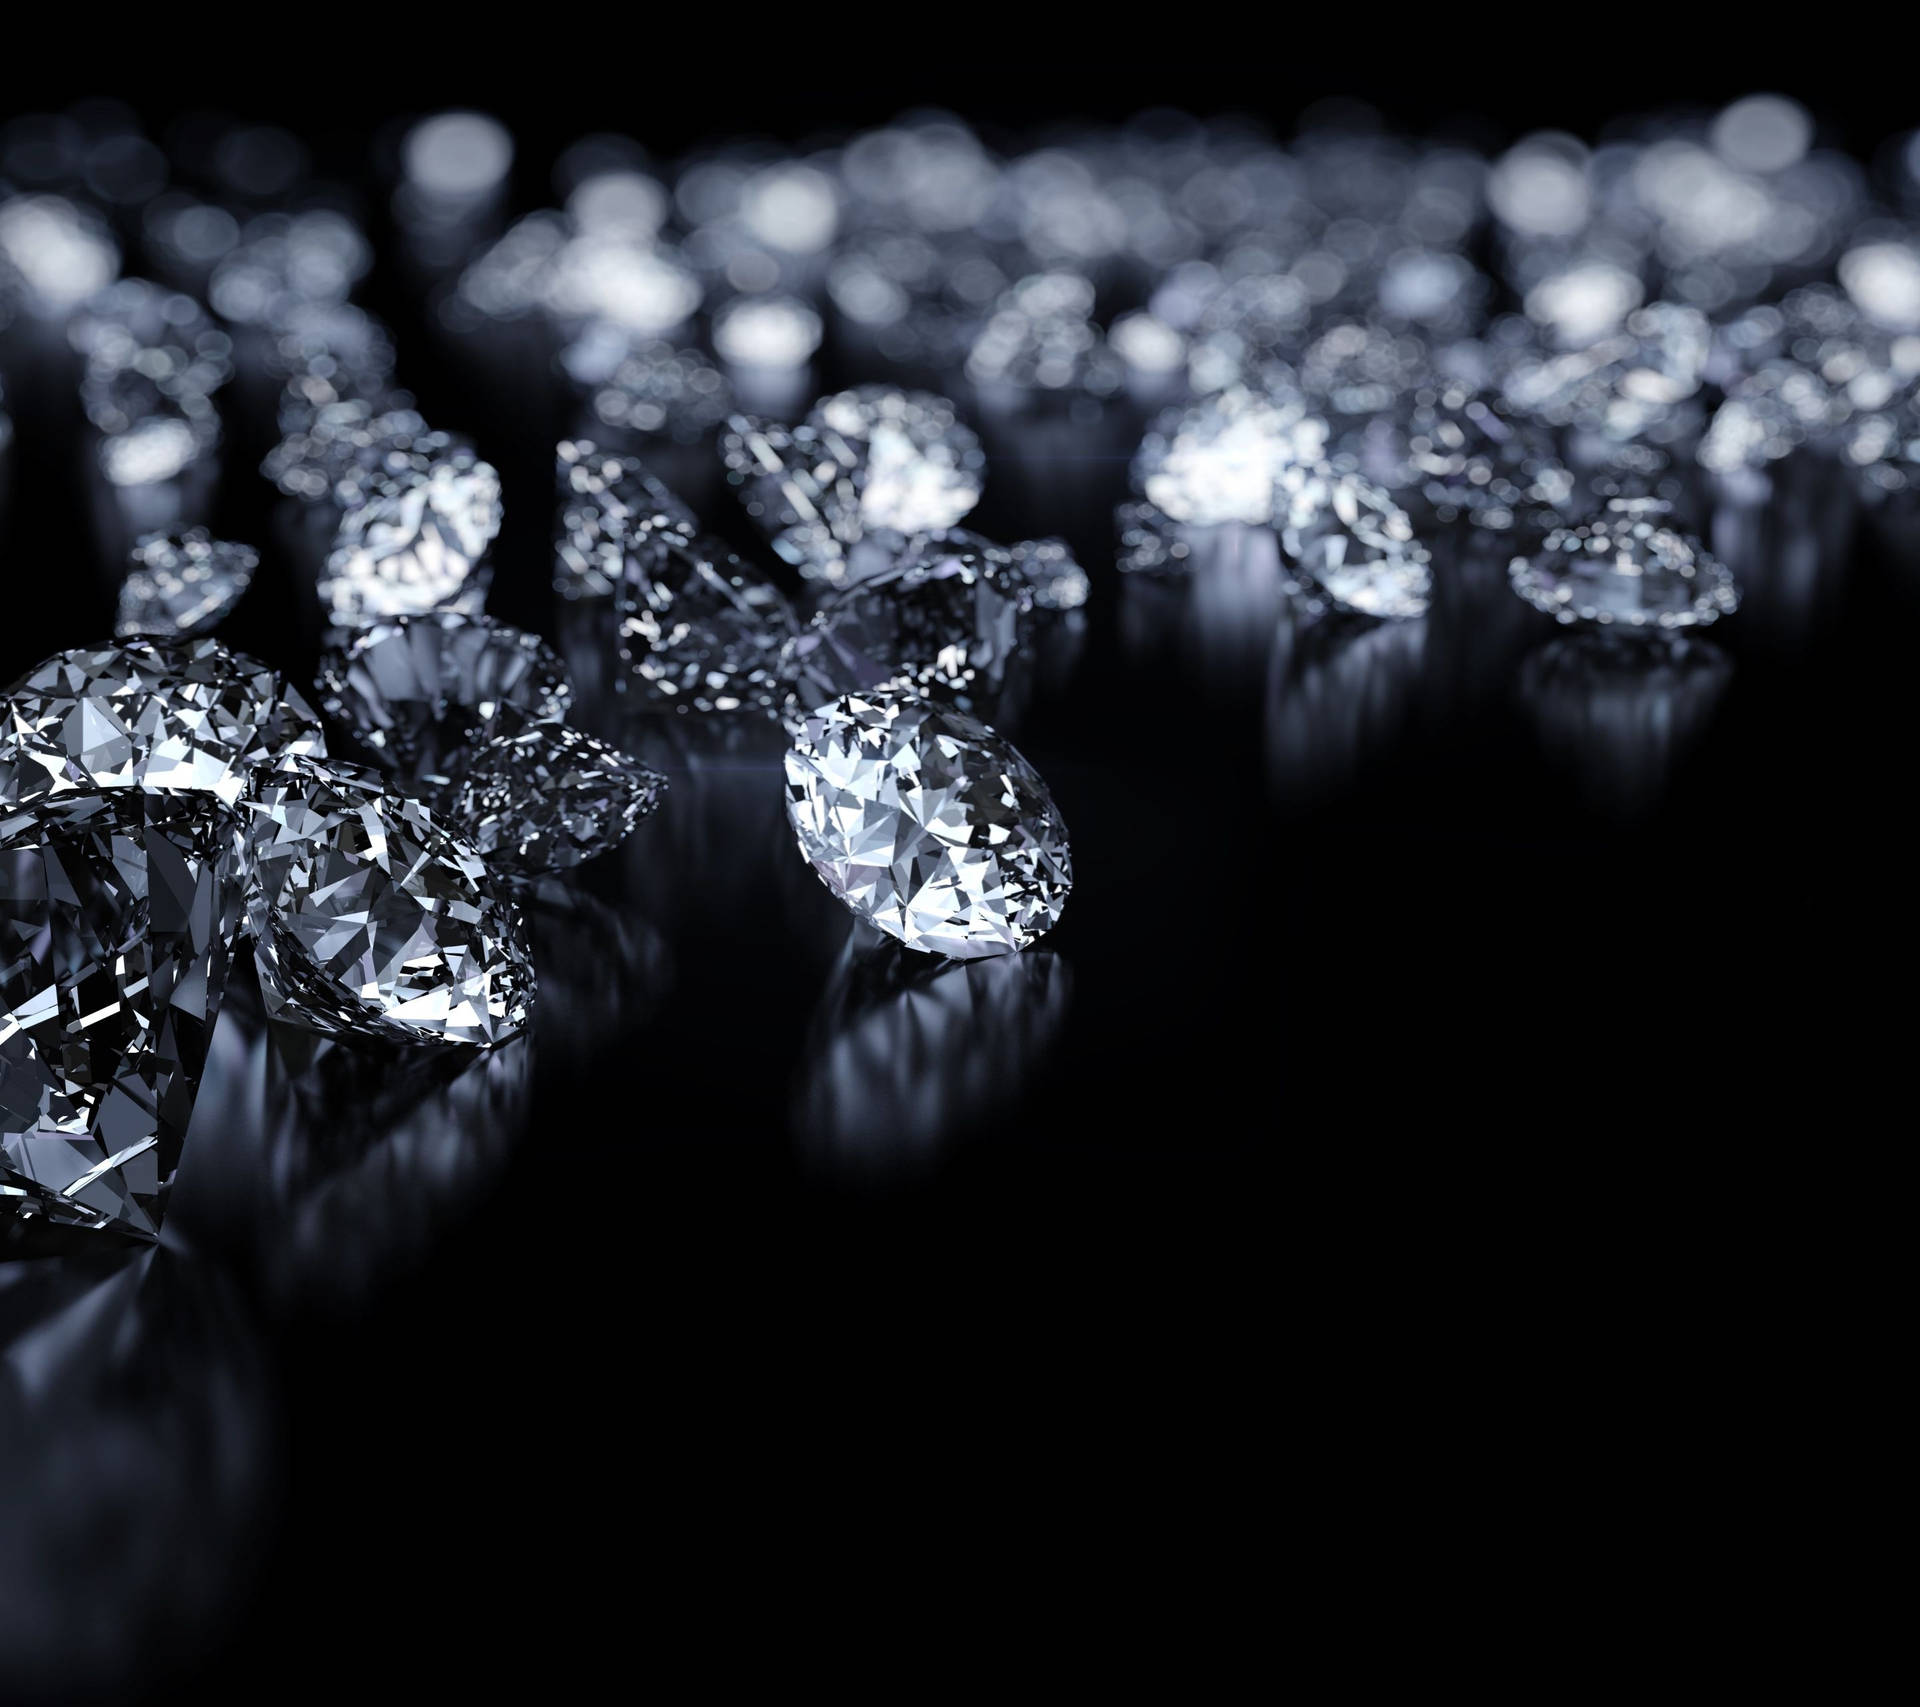 Diamond 2880X2560 Wallpaper and Background Image